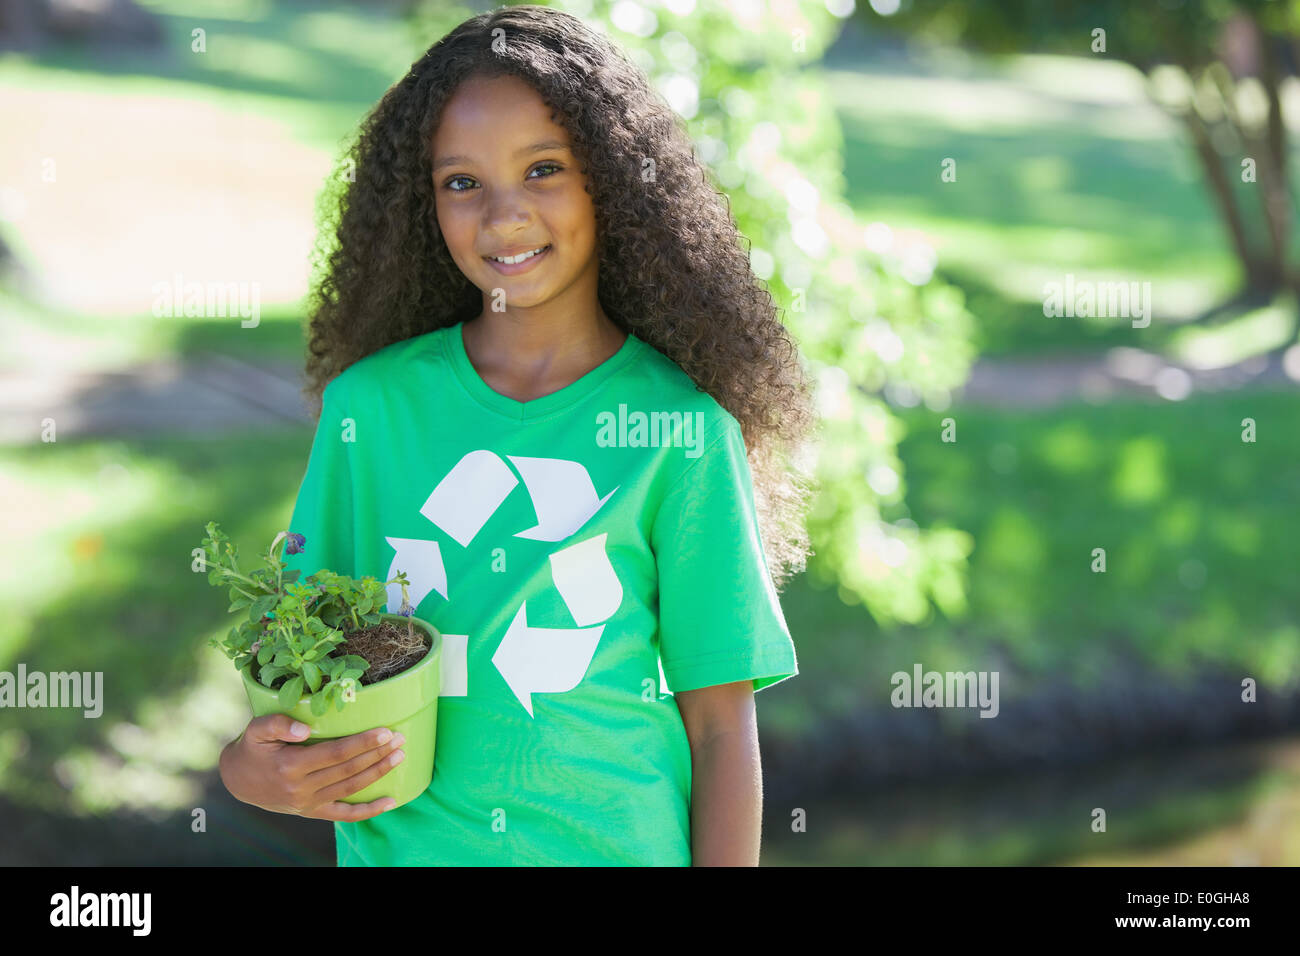 Young environmental activist smiling at the camera holding a potted plant Stock Photo